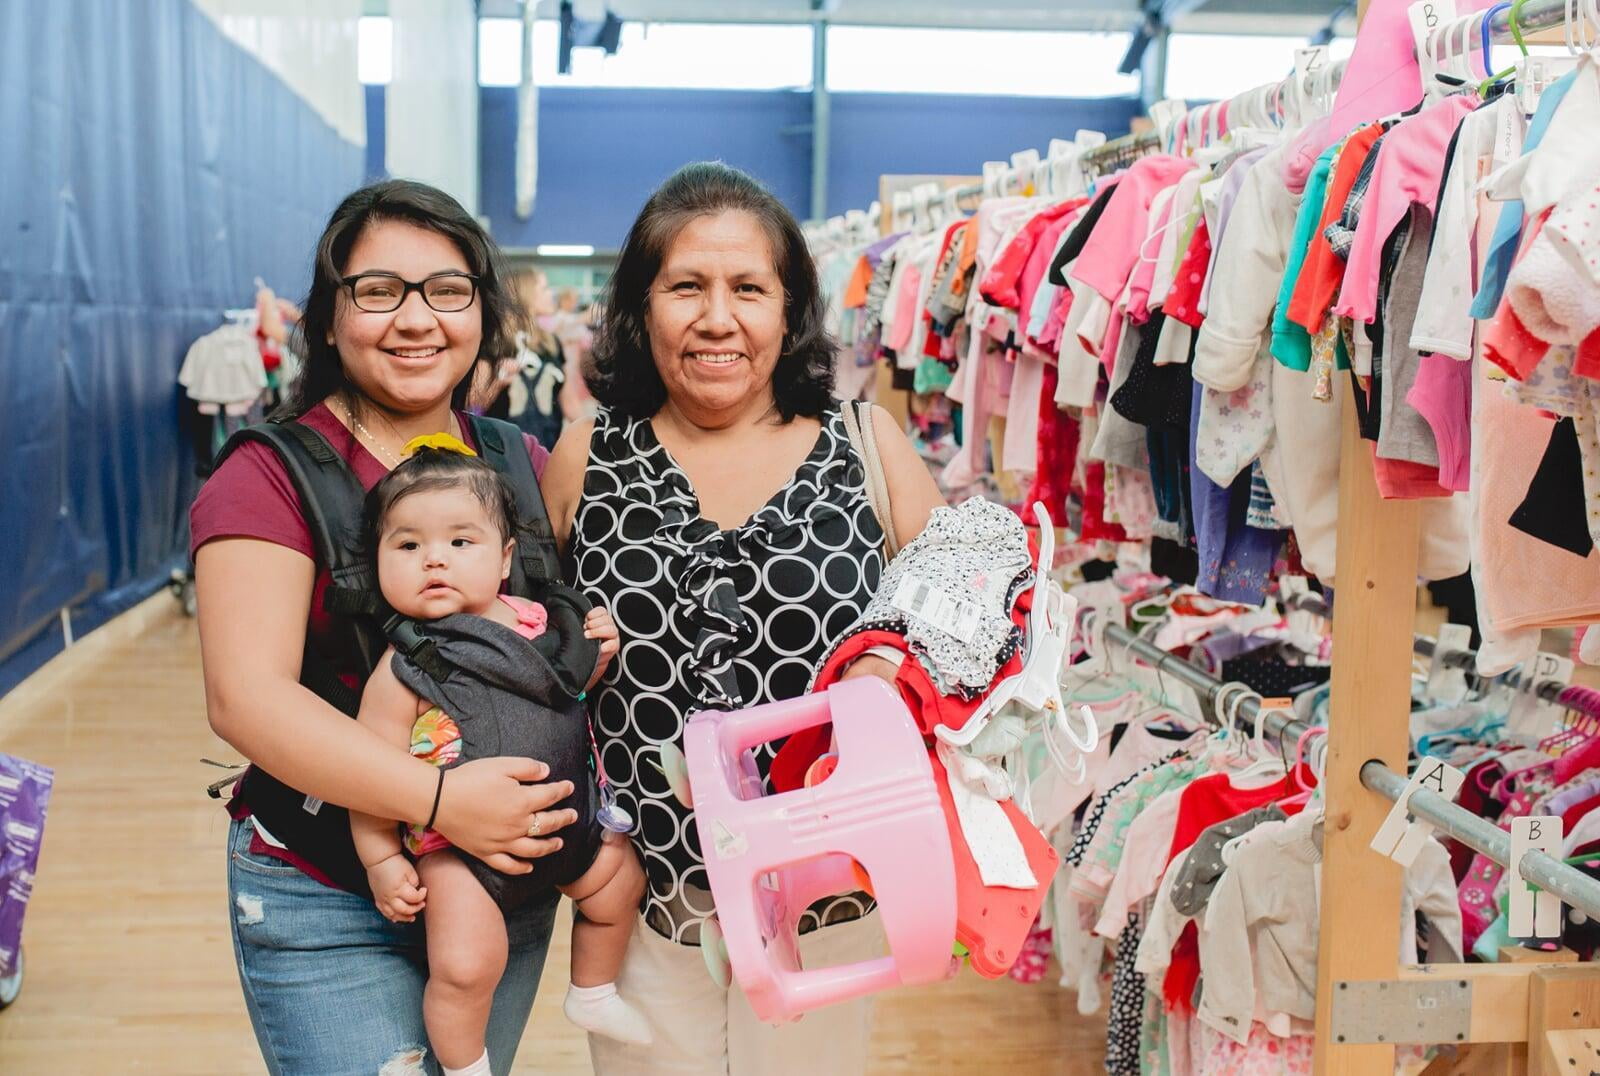 A mom, abuela and granddaughter in an infant carrier shopping for baby clothes. Abuela is holding a babyseat.